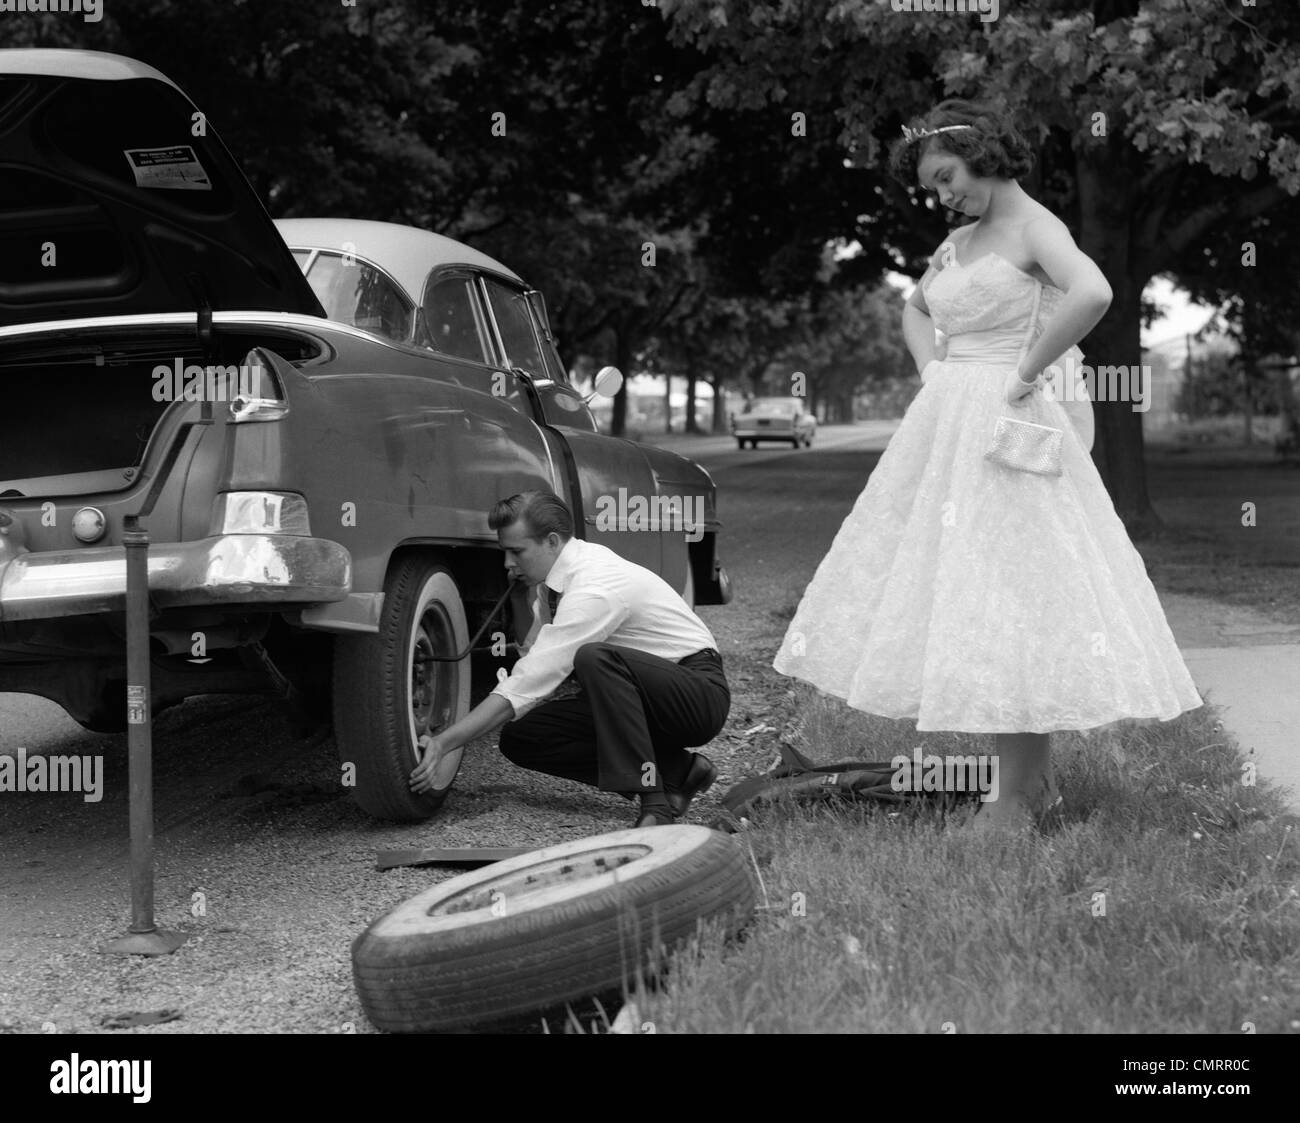 1950s TEENAGE BOY CROUCHING DOWN CHANGING FLAT TIRE PROM DATE WATCHING WITH HANDS ON HIPS Stock Photo